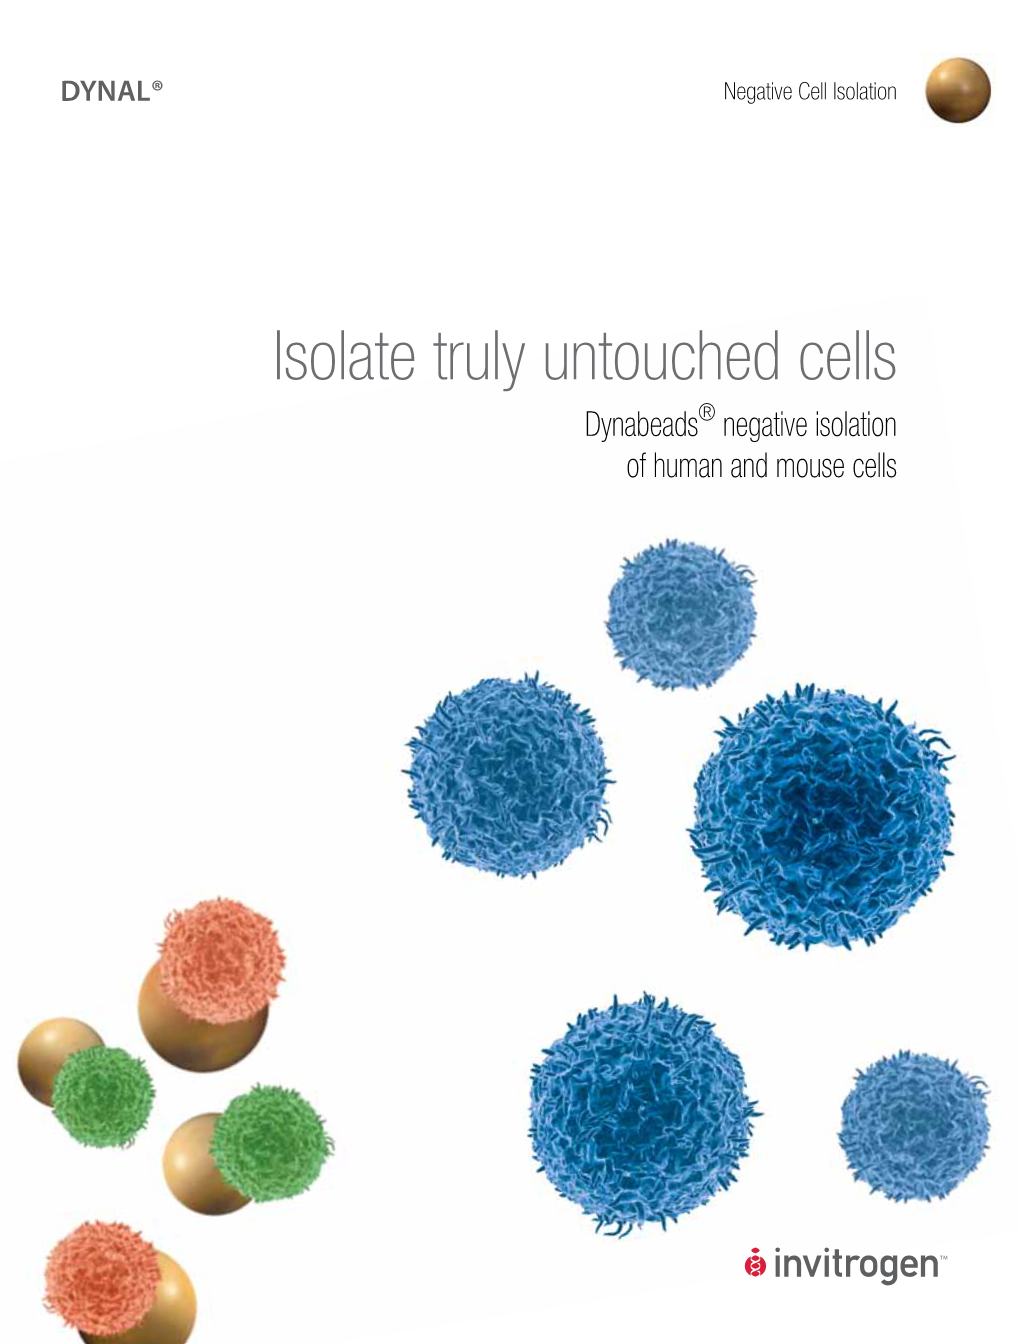 Isolate Truly Untouched Cells Dynabeads® Negative Isolation of Human and Mouse Cells Negative Cell Isolation